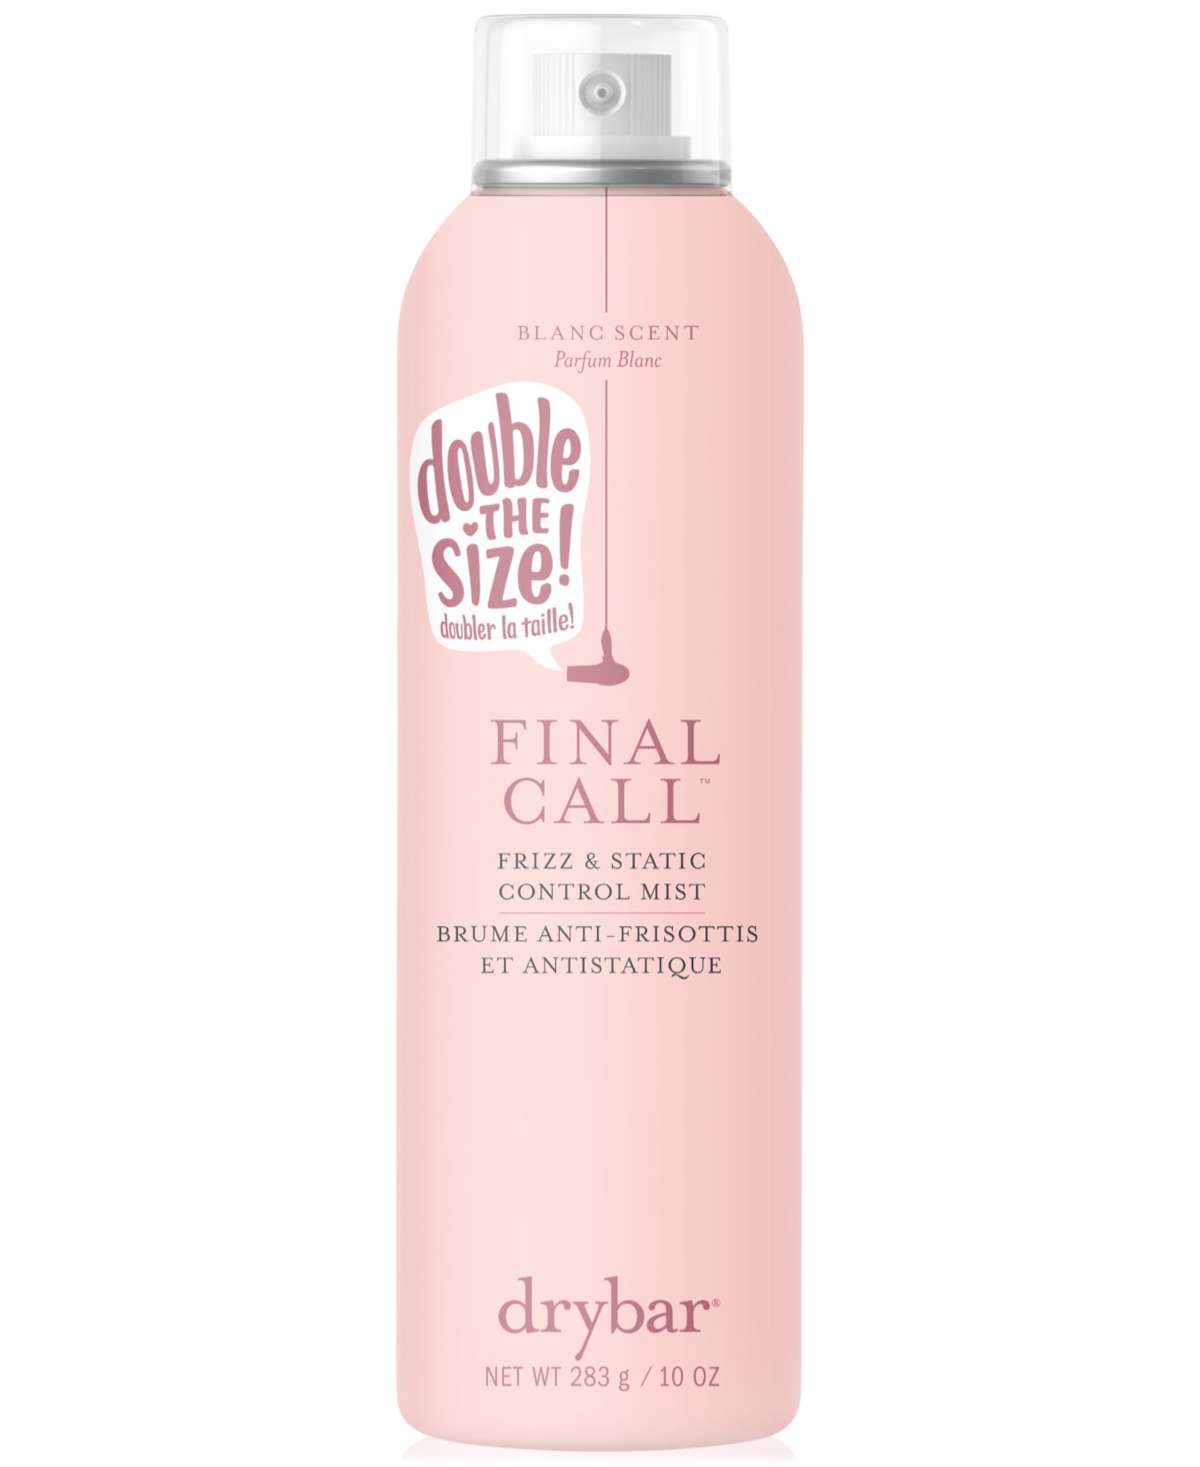 Drybar Final Call Frizz & Static Control Mist In No Color